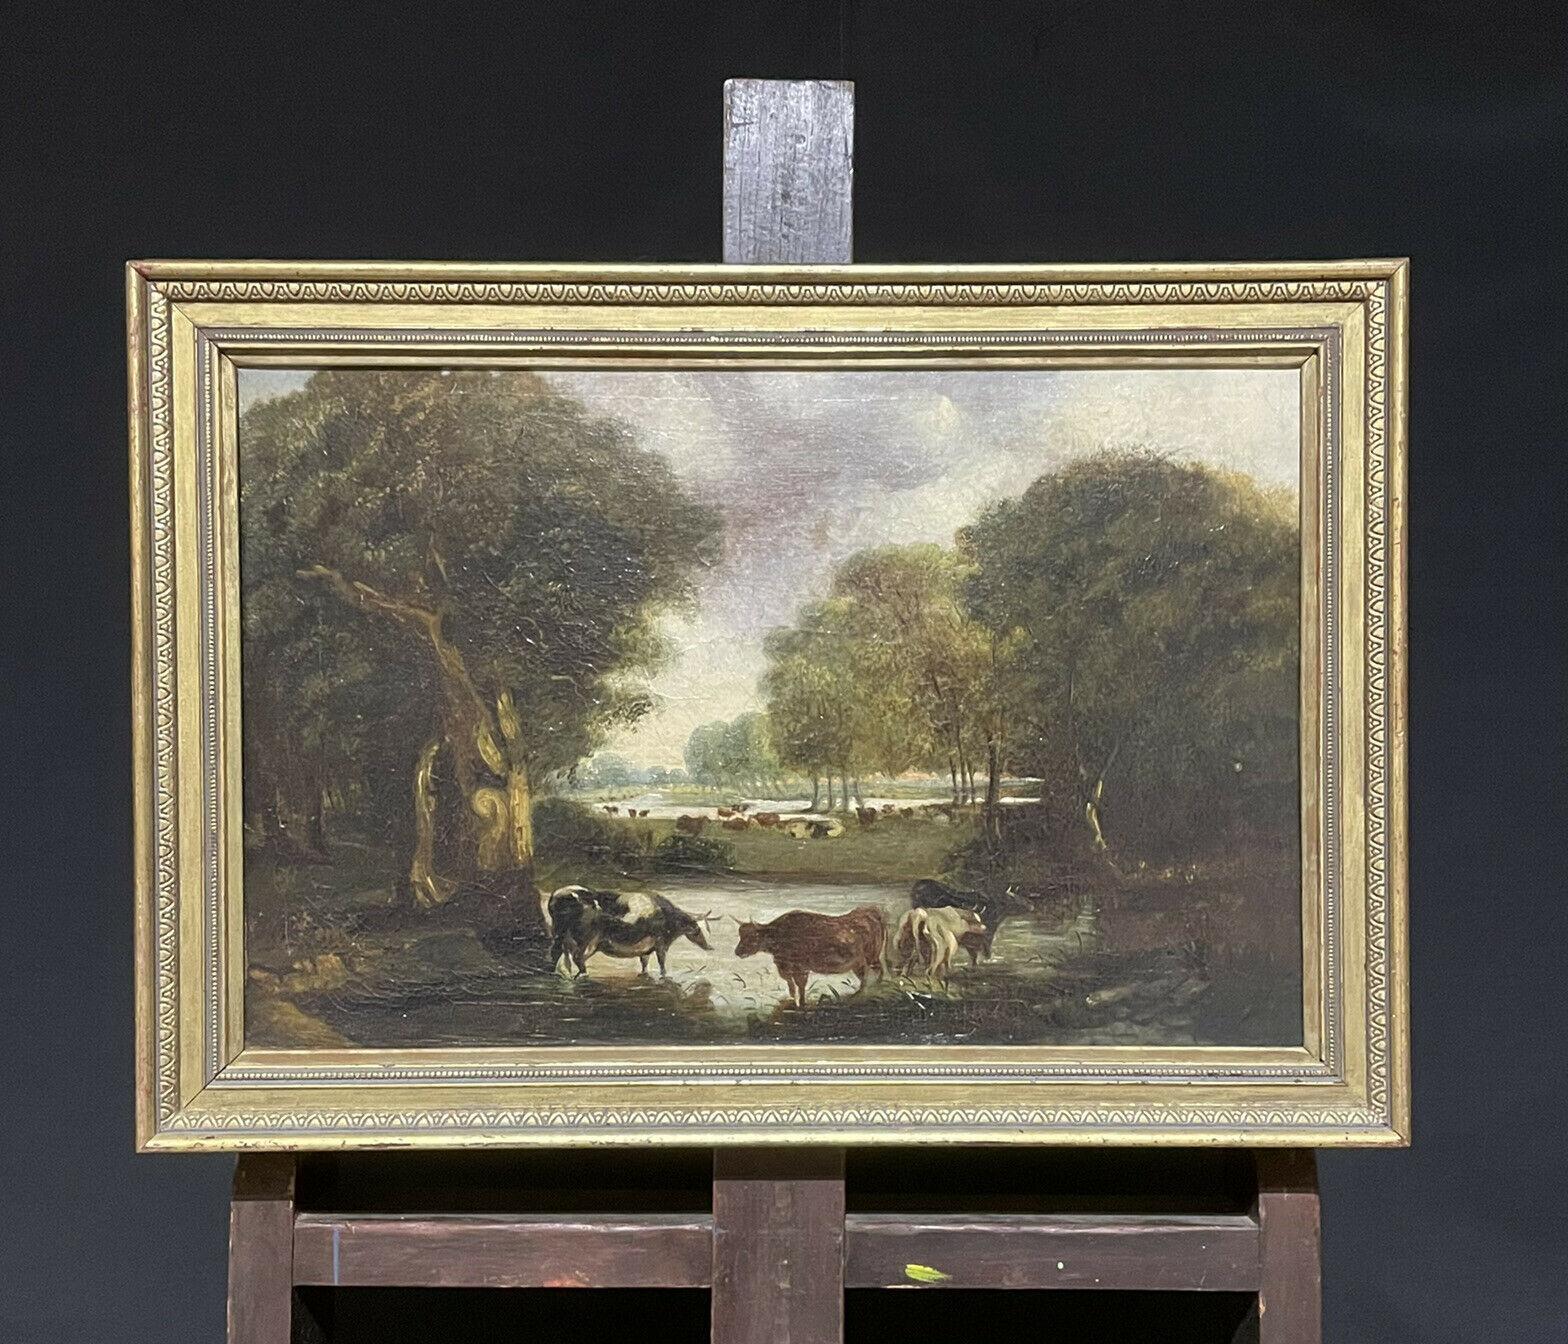 VICTORIAN 19TH CENTURY ENGLISH OIL PAINTING - CATTLE DRINKING FROM WOODLAND POOL - Painting by Unknown